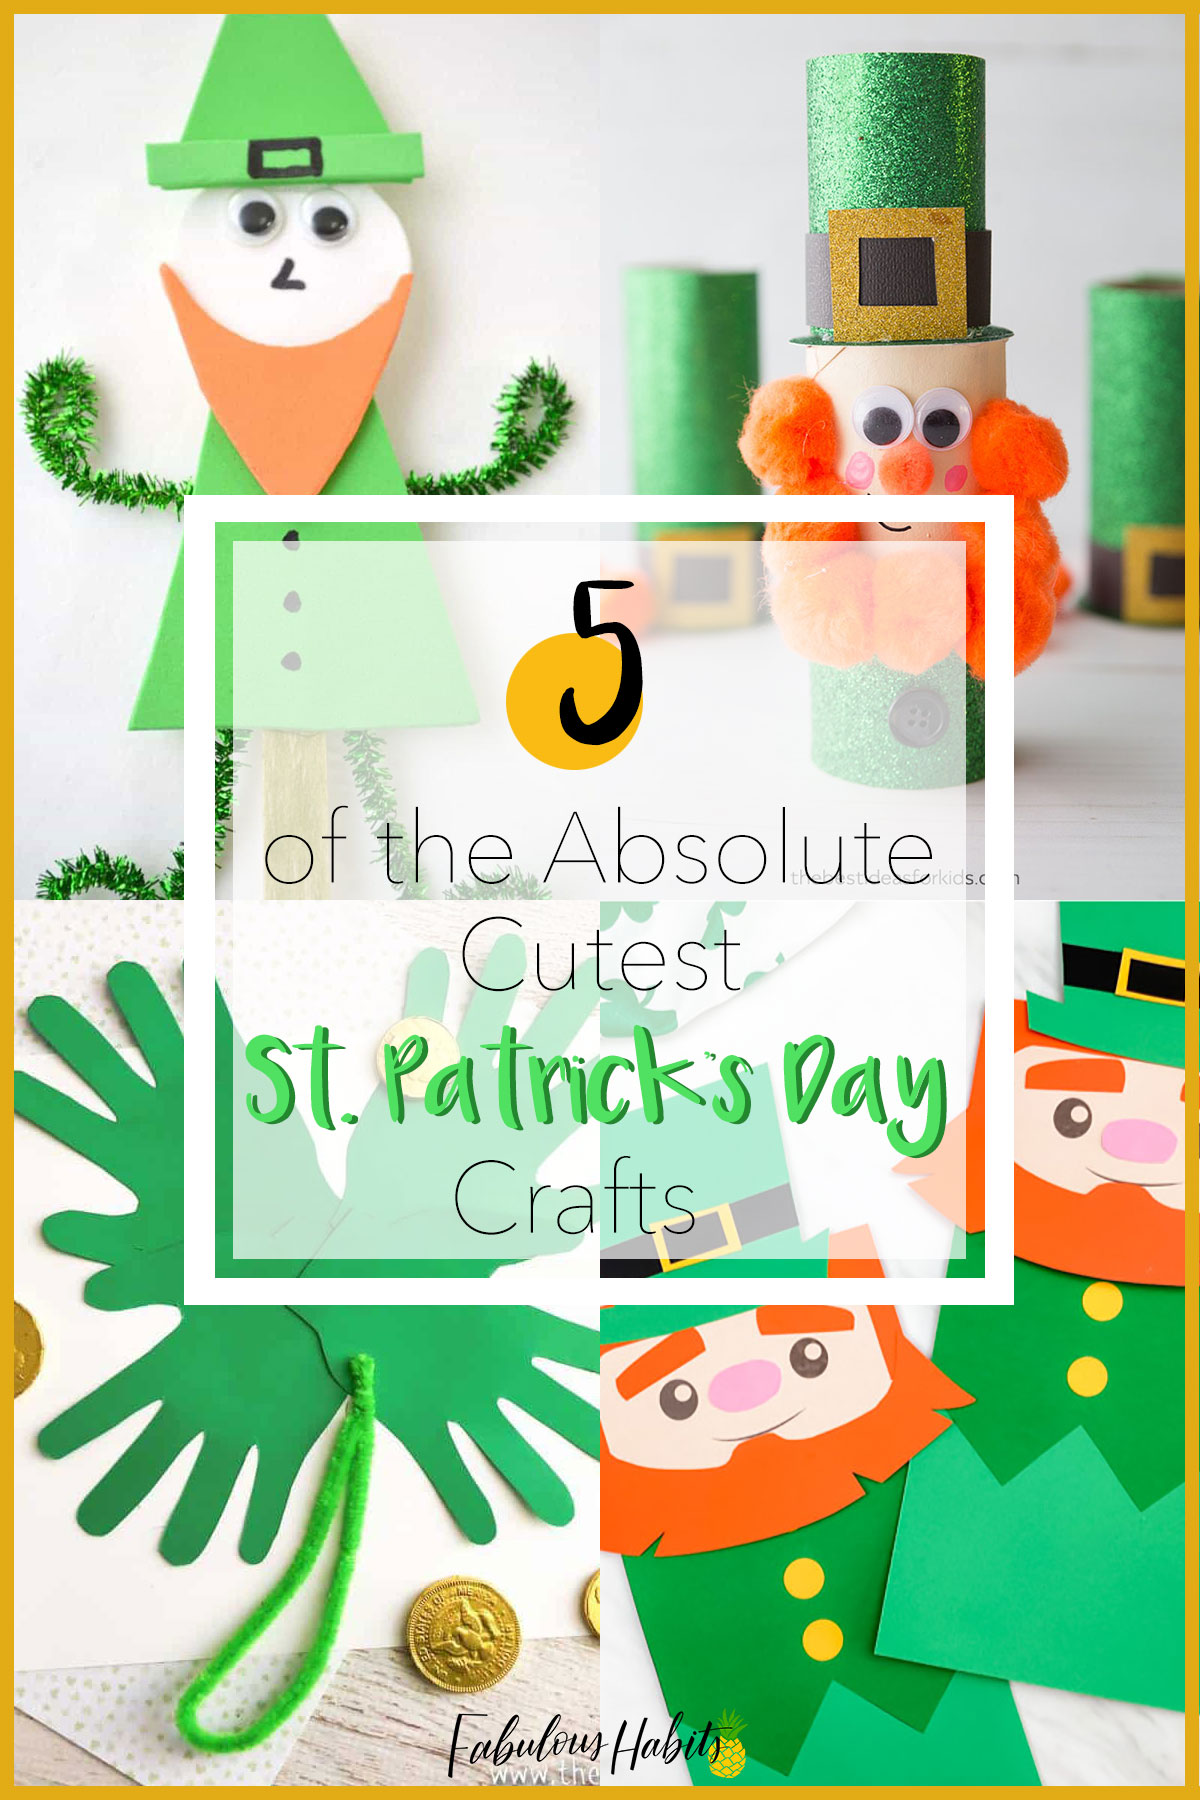 We've rounded up 5 of the cutest crafts for St. Patrick's Day - and they're all kid-friendly! Have fun making these lucky creations with your family. #stpatricksday